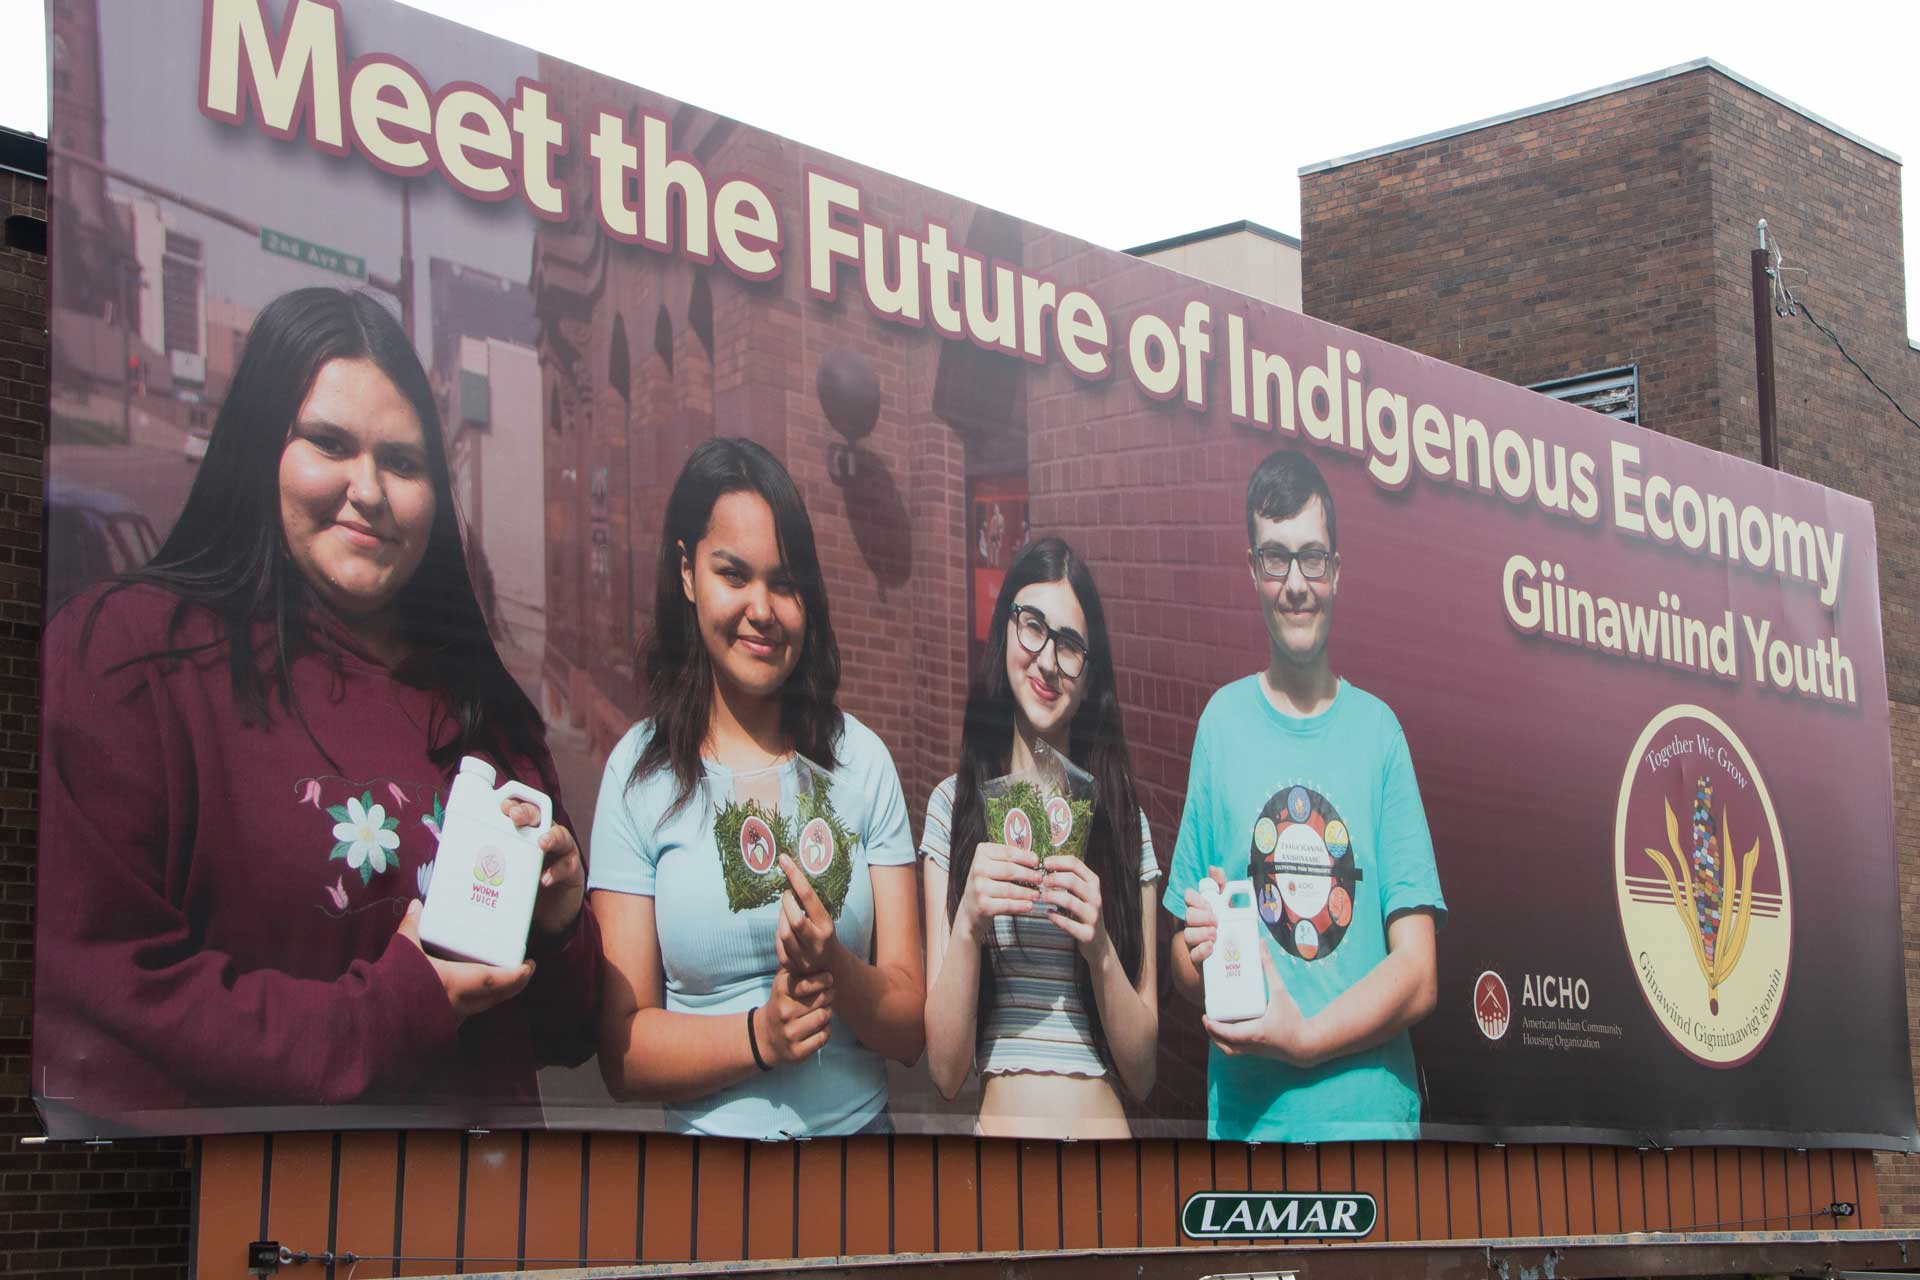 A billboard displays four smiling young individuals holding various items. The text on the billboard reads, "Meet the Future of Indigenous Economy, Giinawiind Youth" with the AICHO and Lamar logos. The background features a brick building and an urban street.